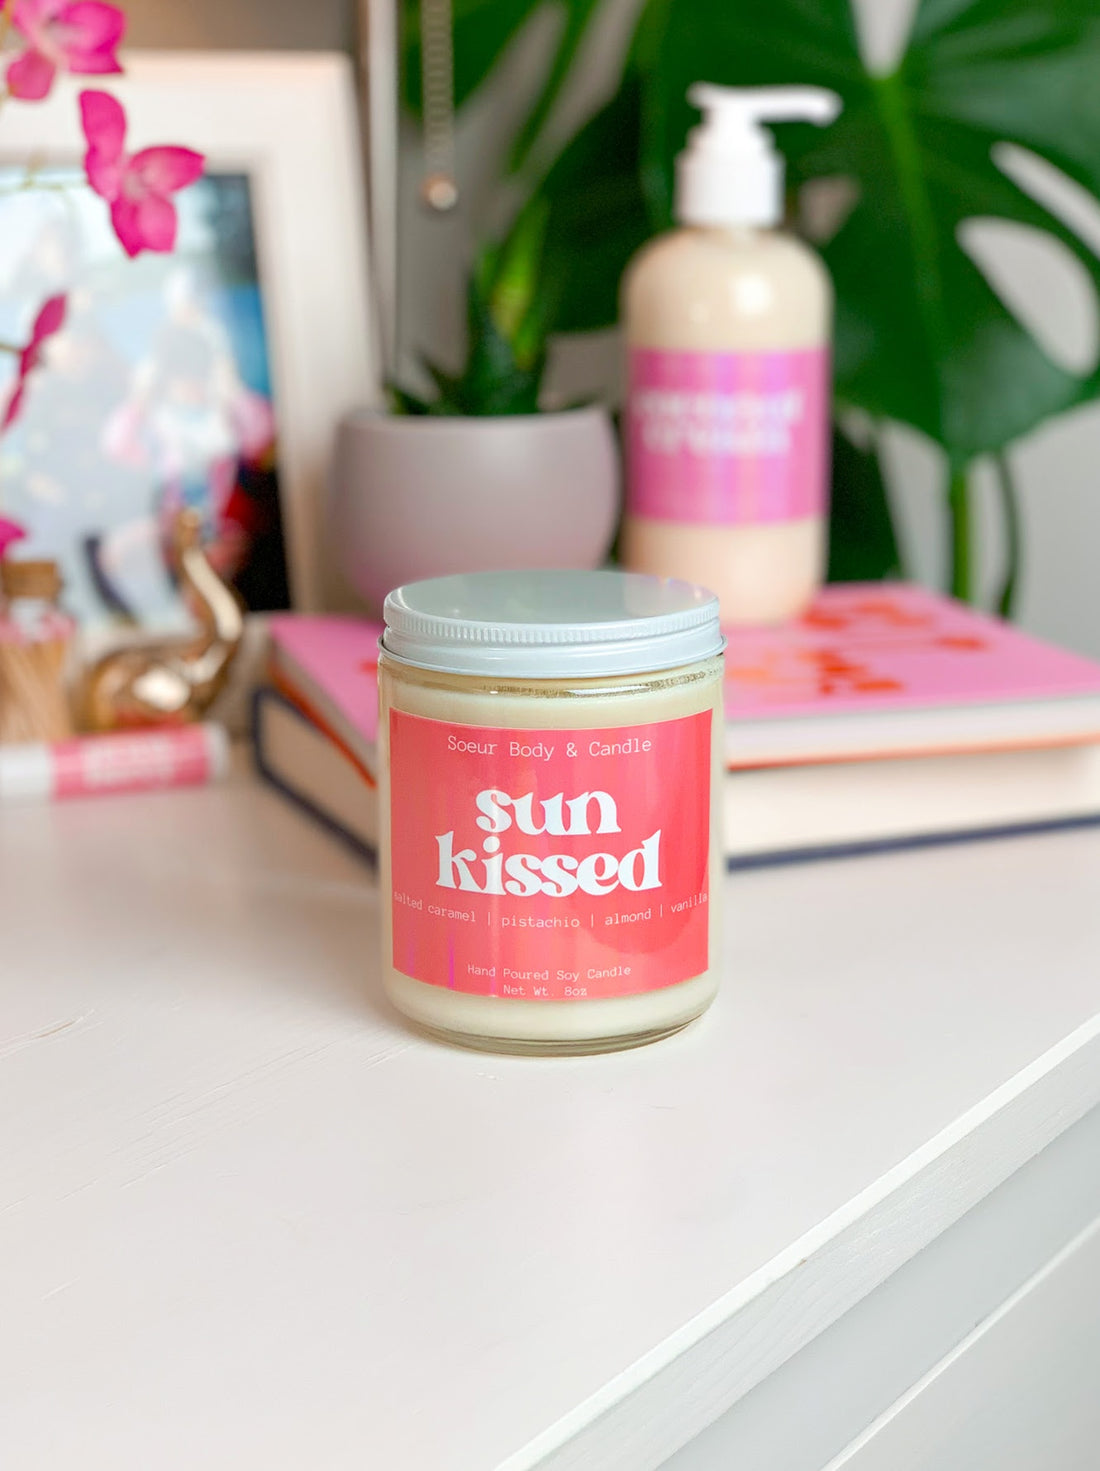 Sun Kissed Soy Candle (salted caramel, pistachio, almond, vanilla)